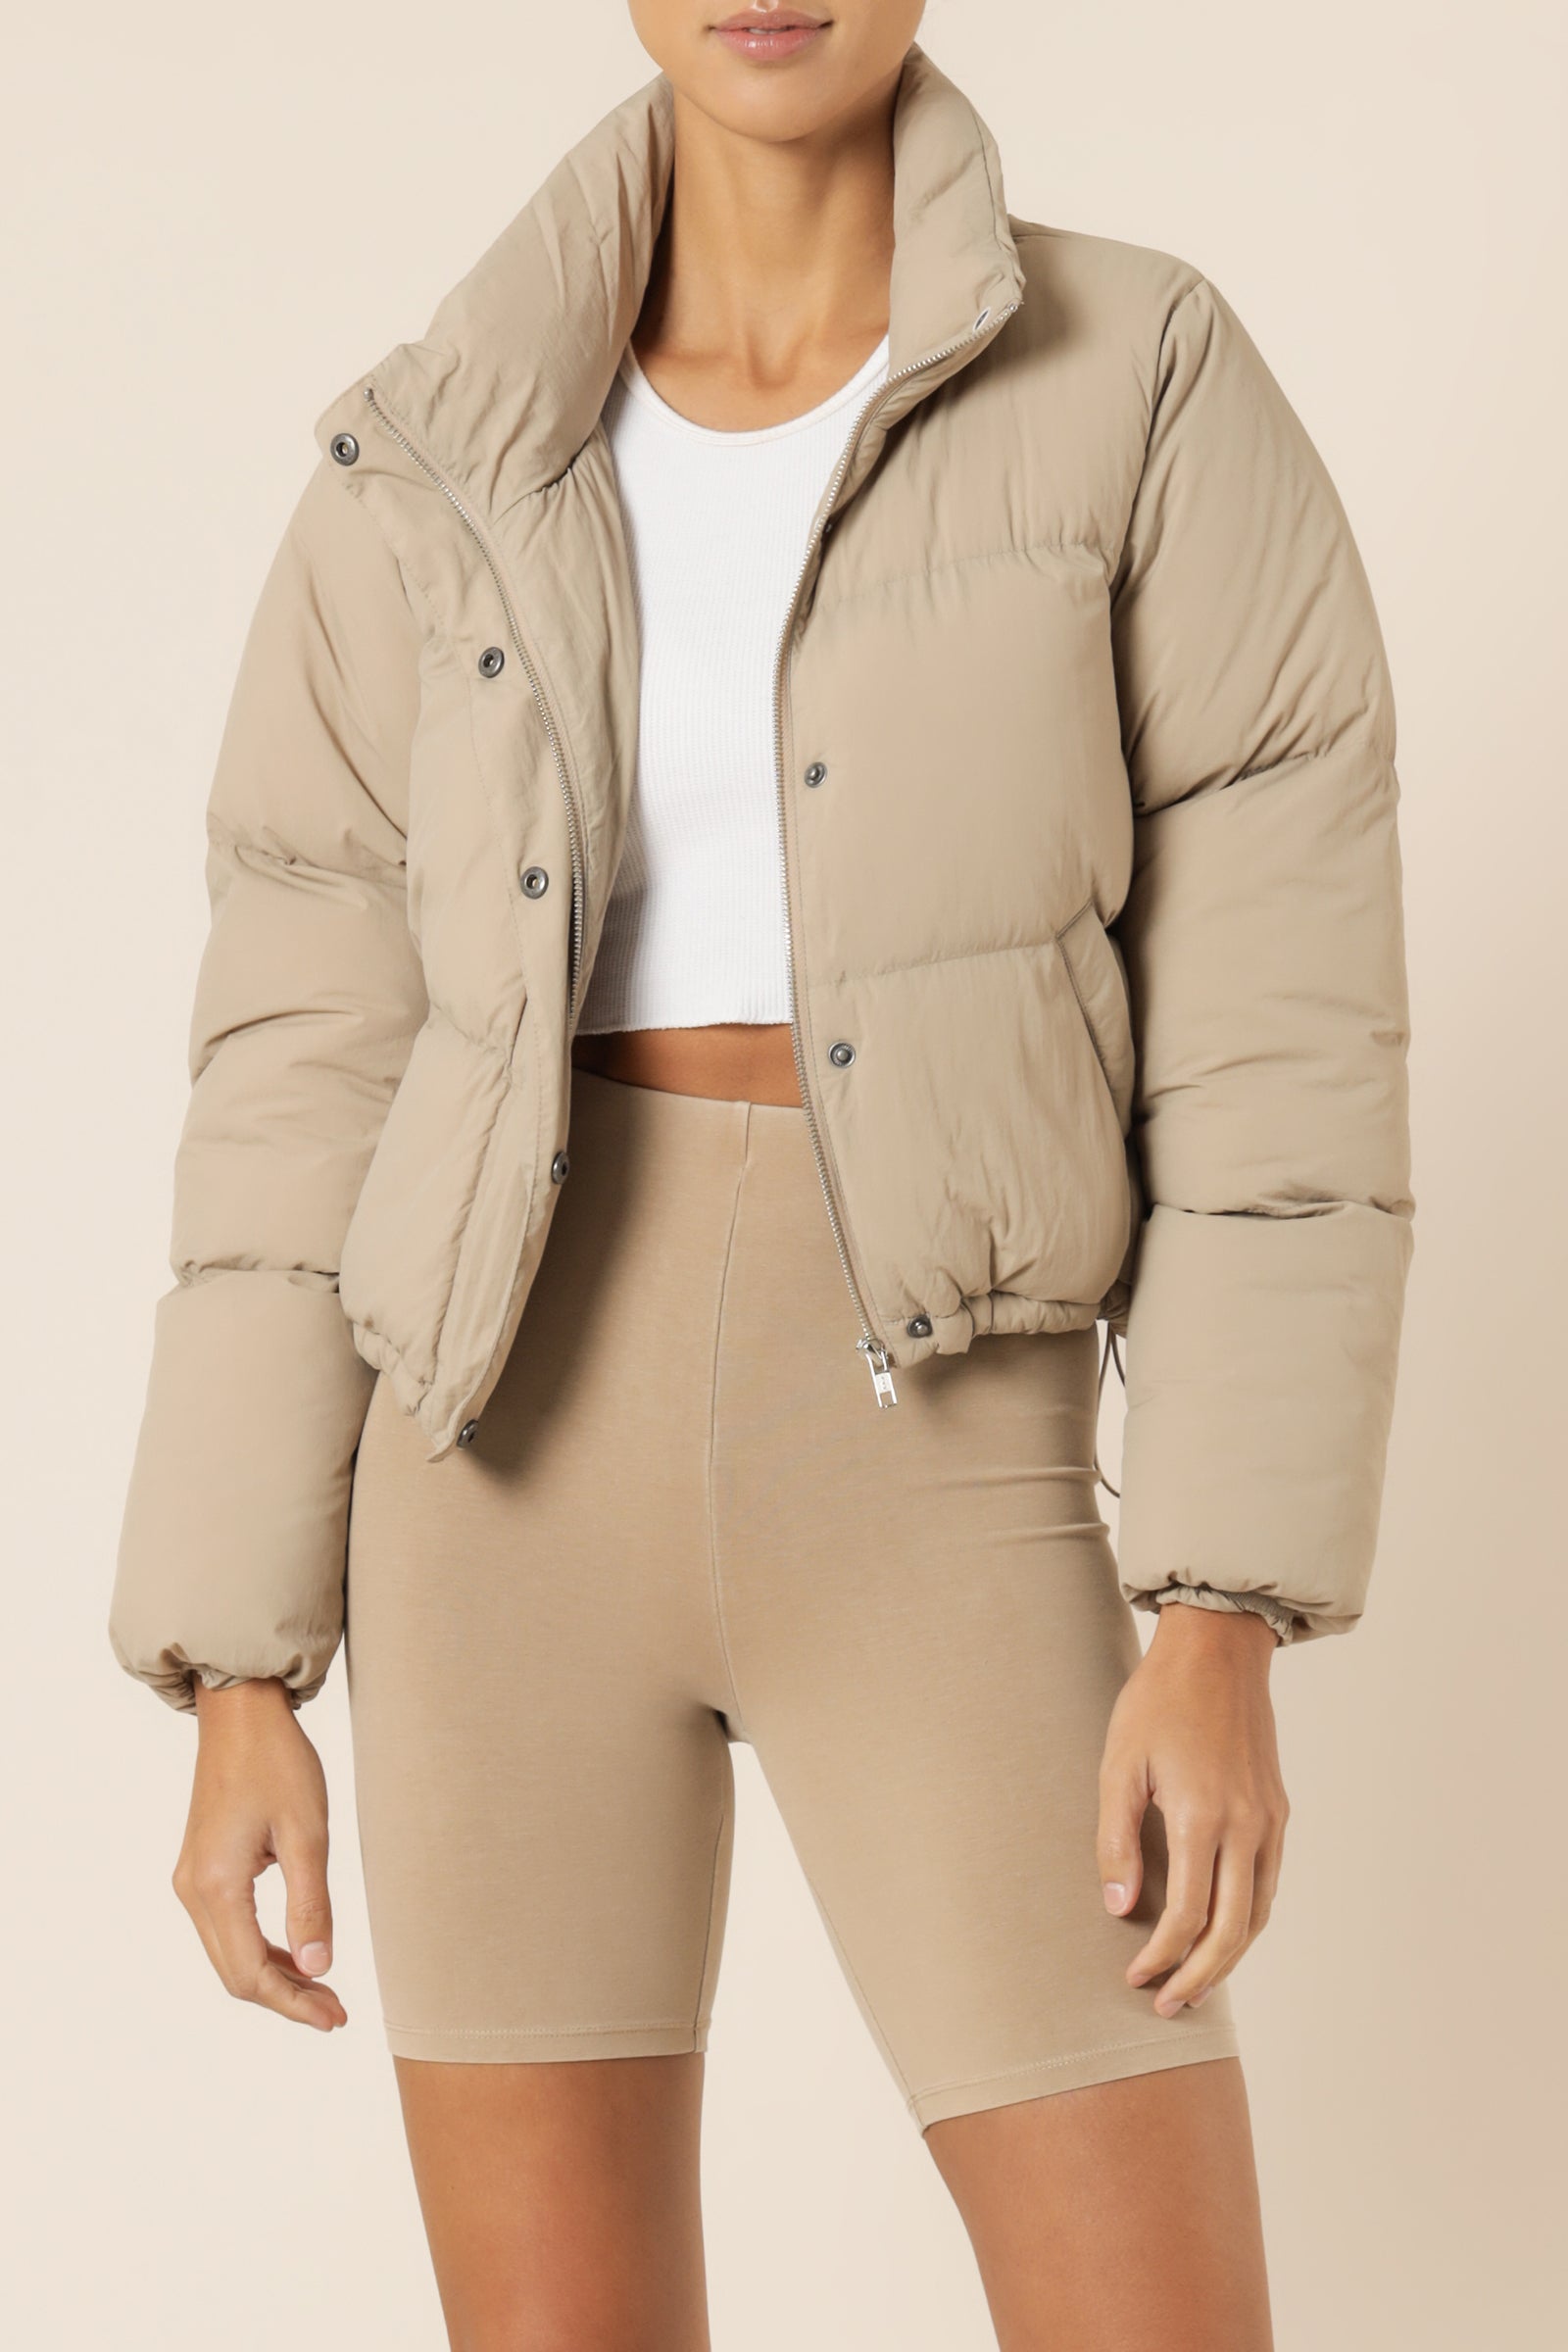 Nude Lucy Topher Puffer Jacket Mocha Jackets 